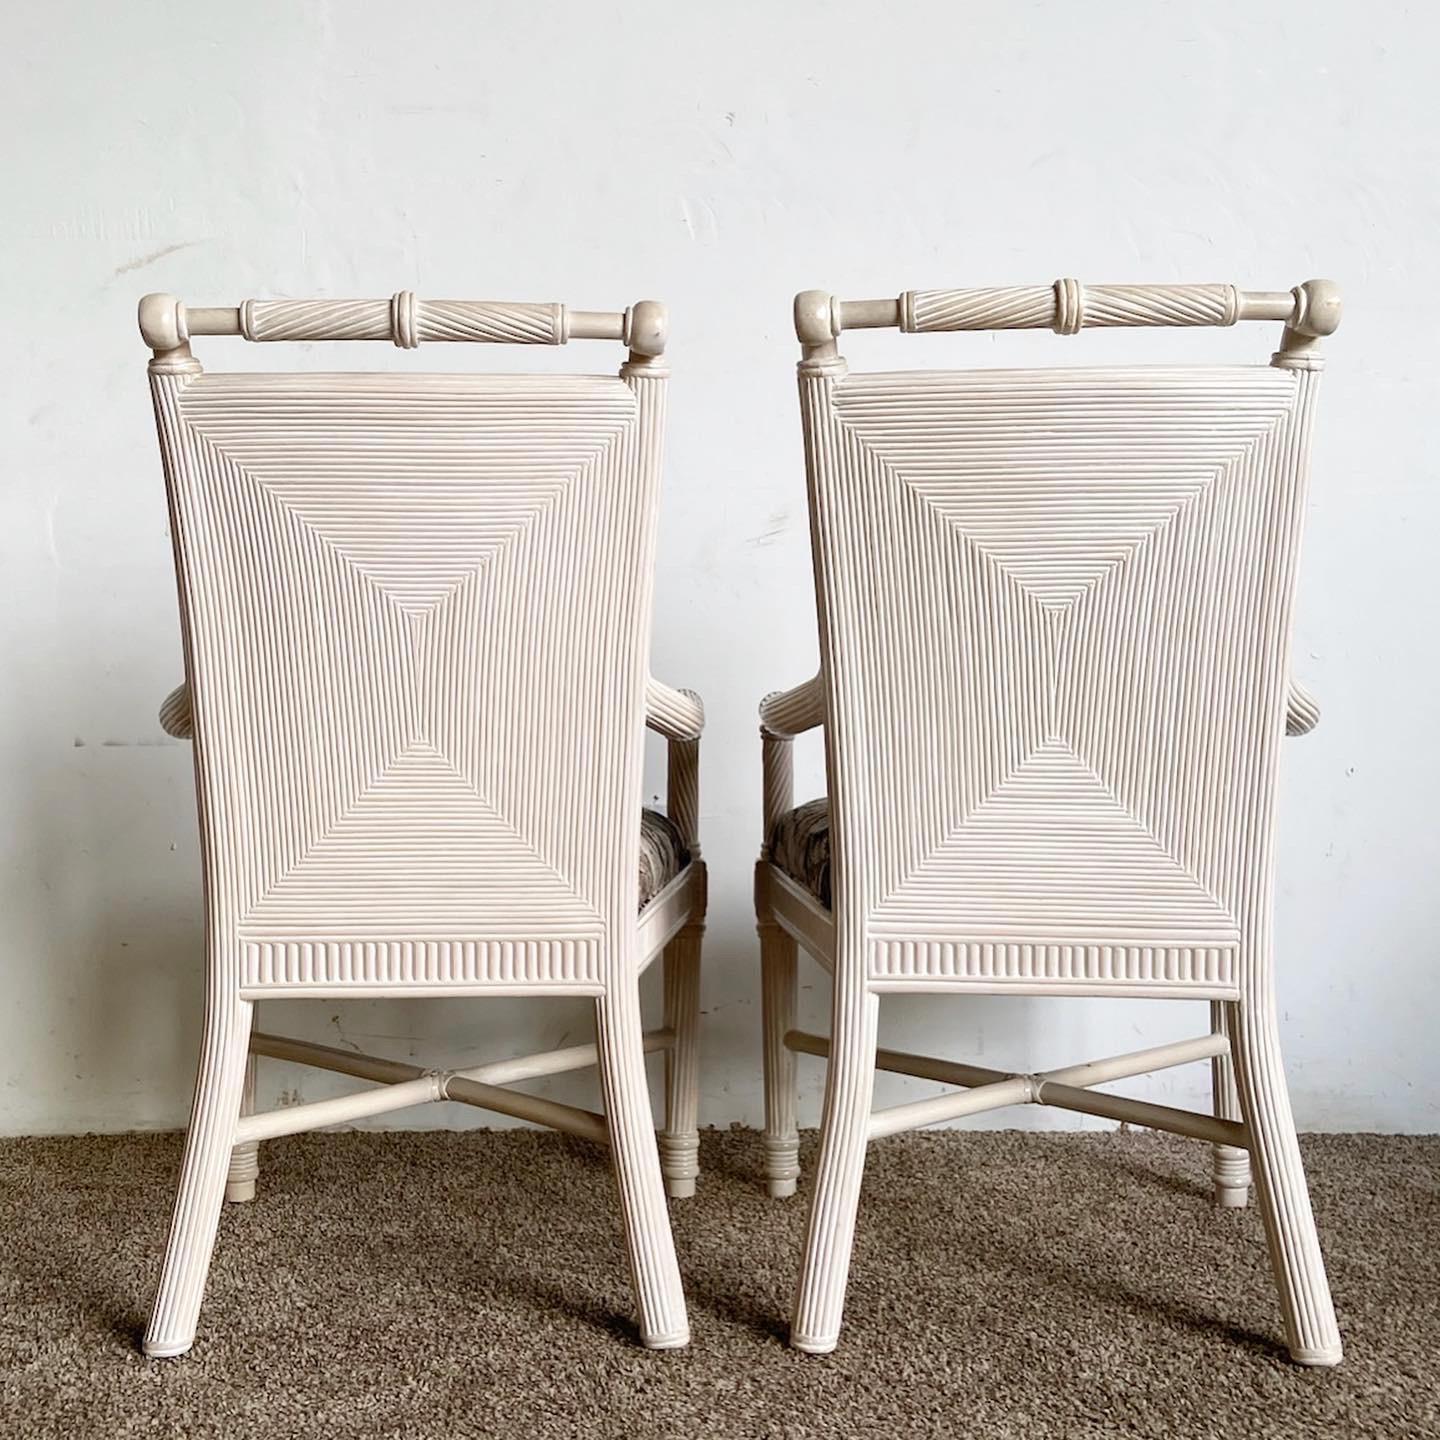 Boho Chic White Washed Pencil Reed Armchairs - a Pair In Good Condition For Sale In Delray Beach, FL